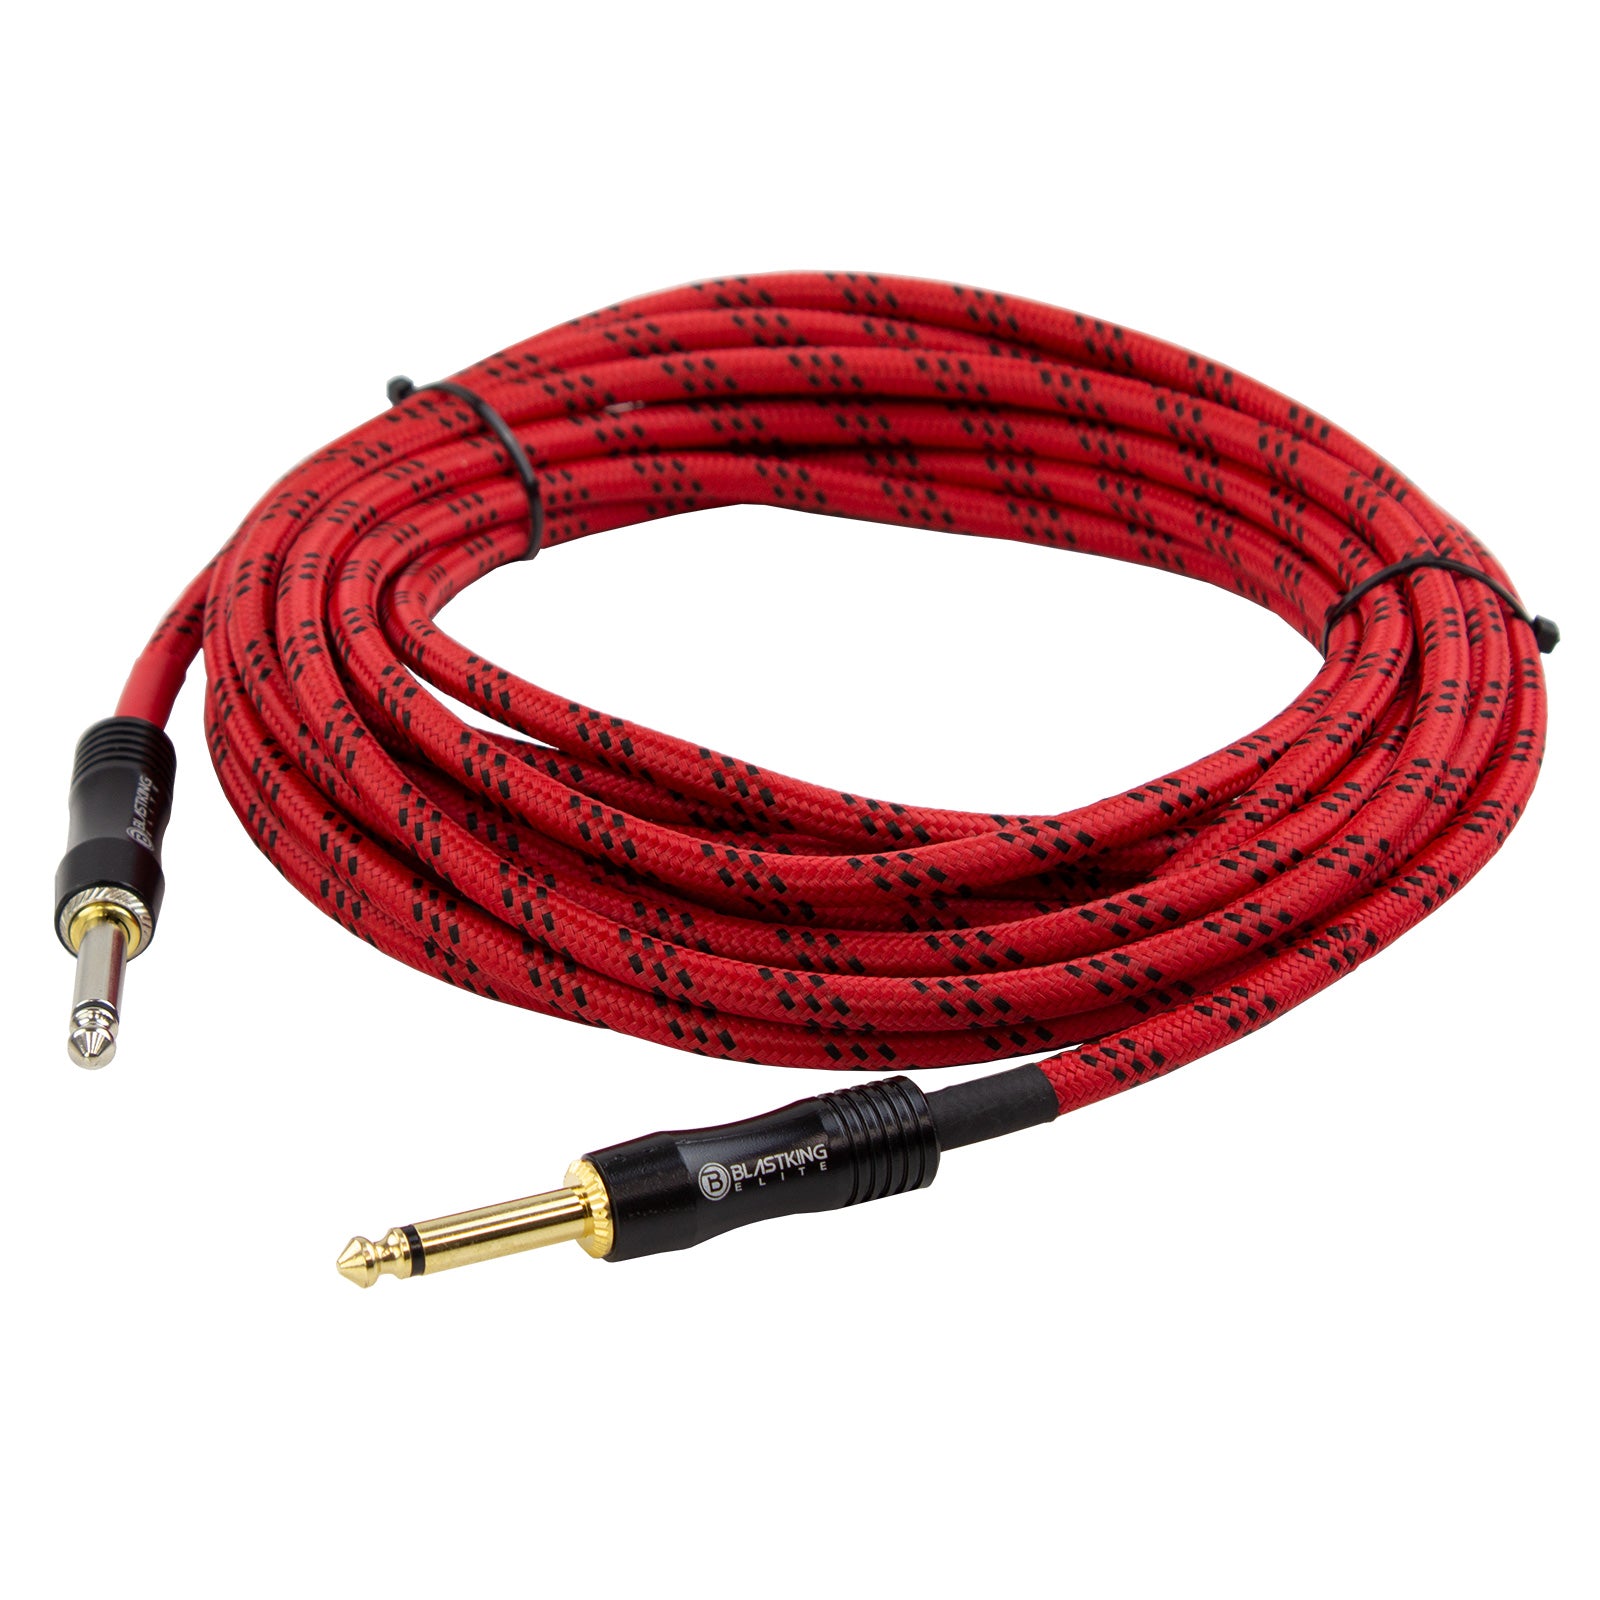 Blastking 20' Static Free Nylon Jacket Noiseless Guitar Cable Red – CGTR-20RB